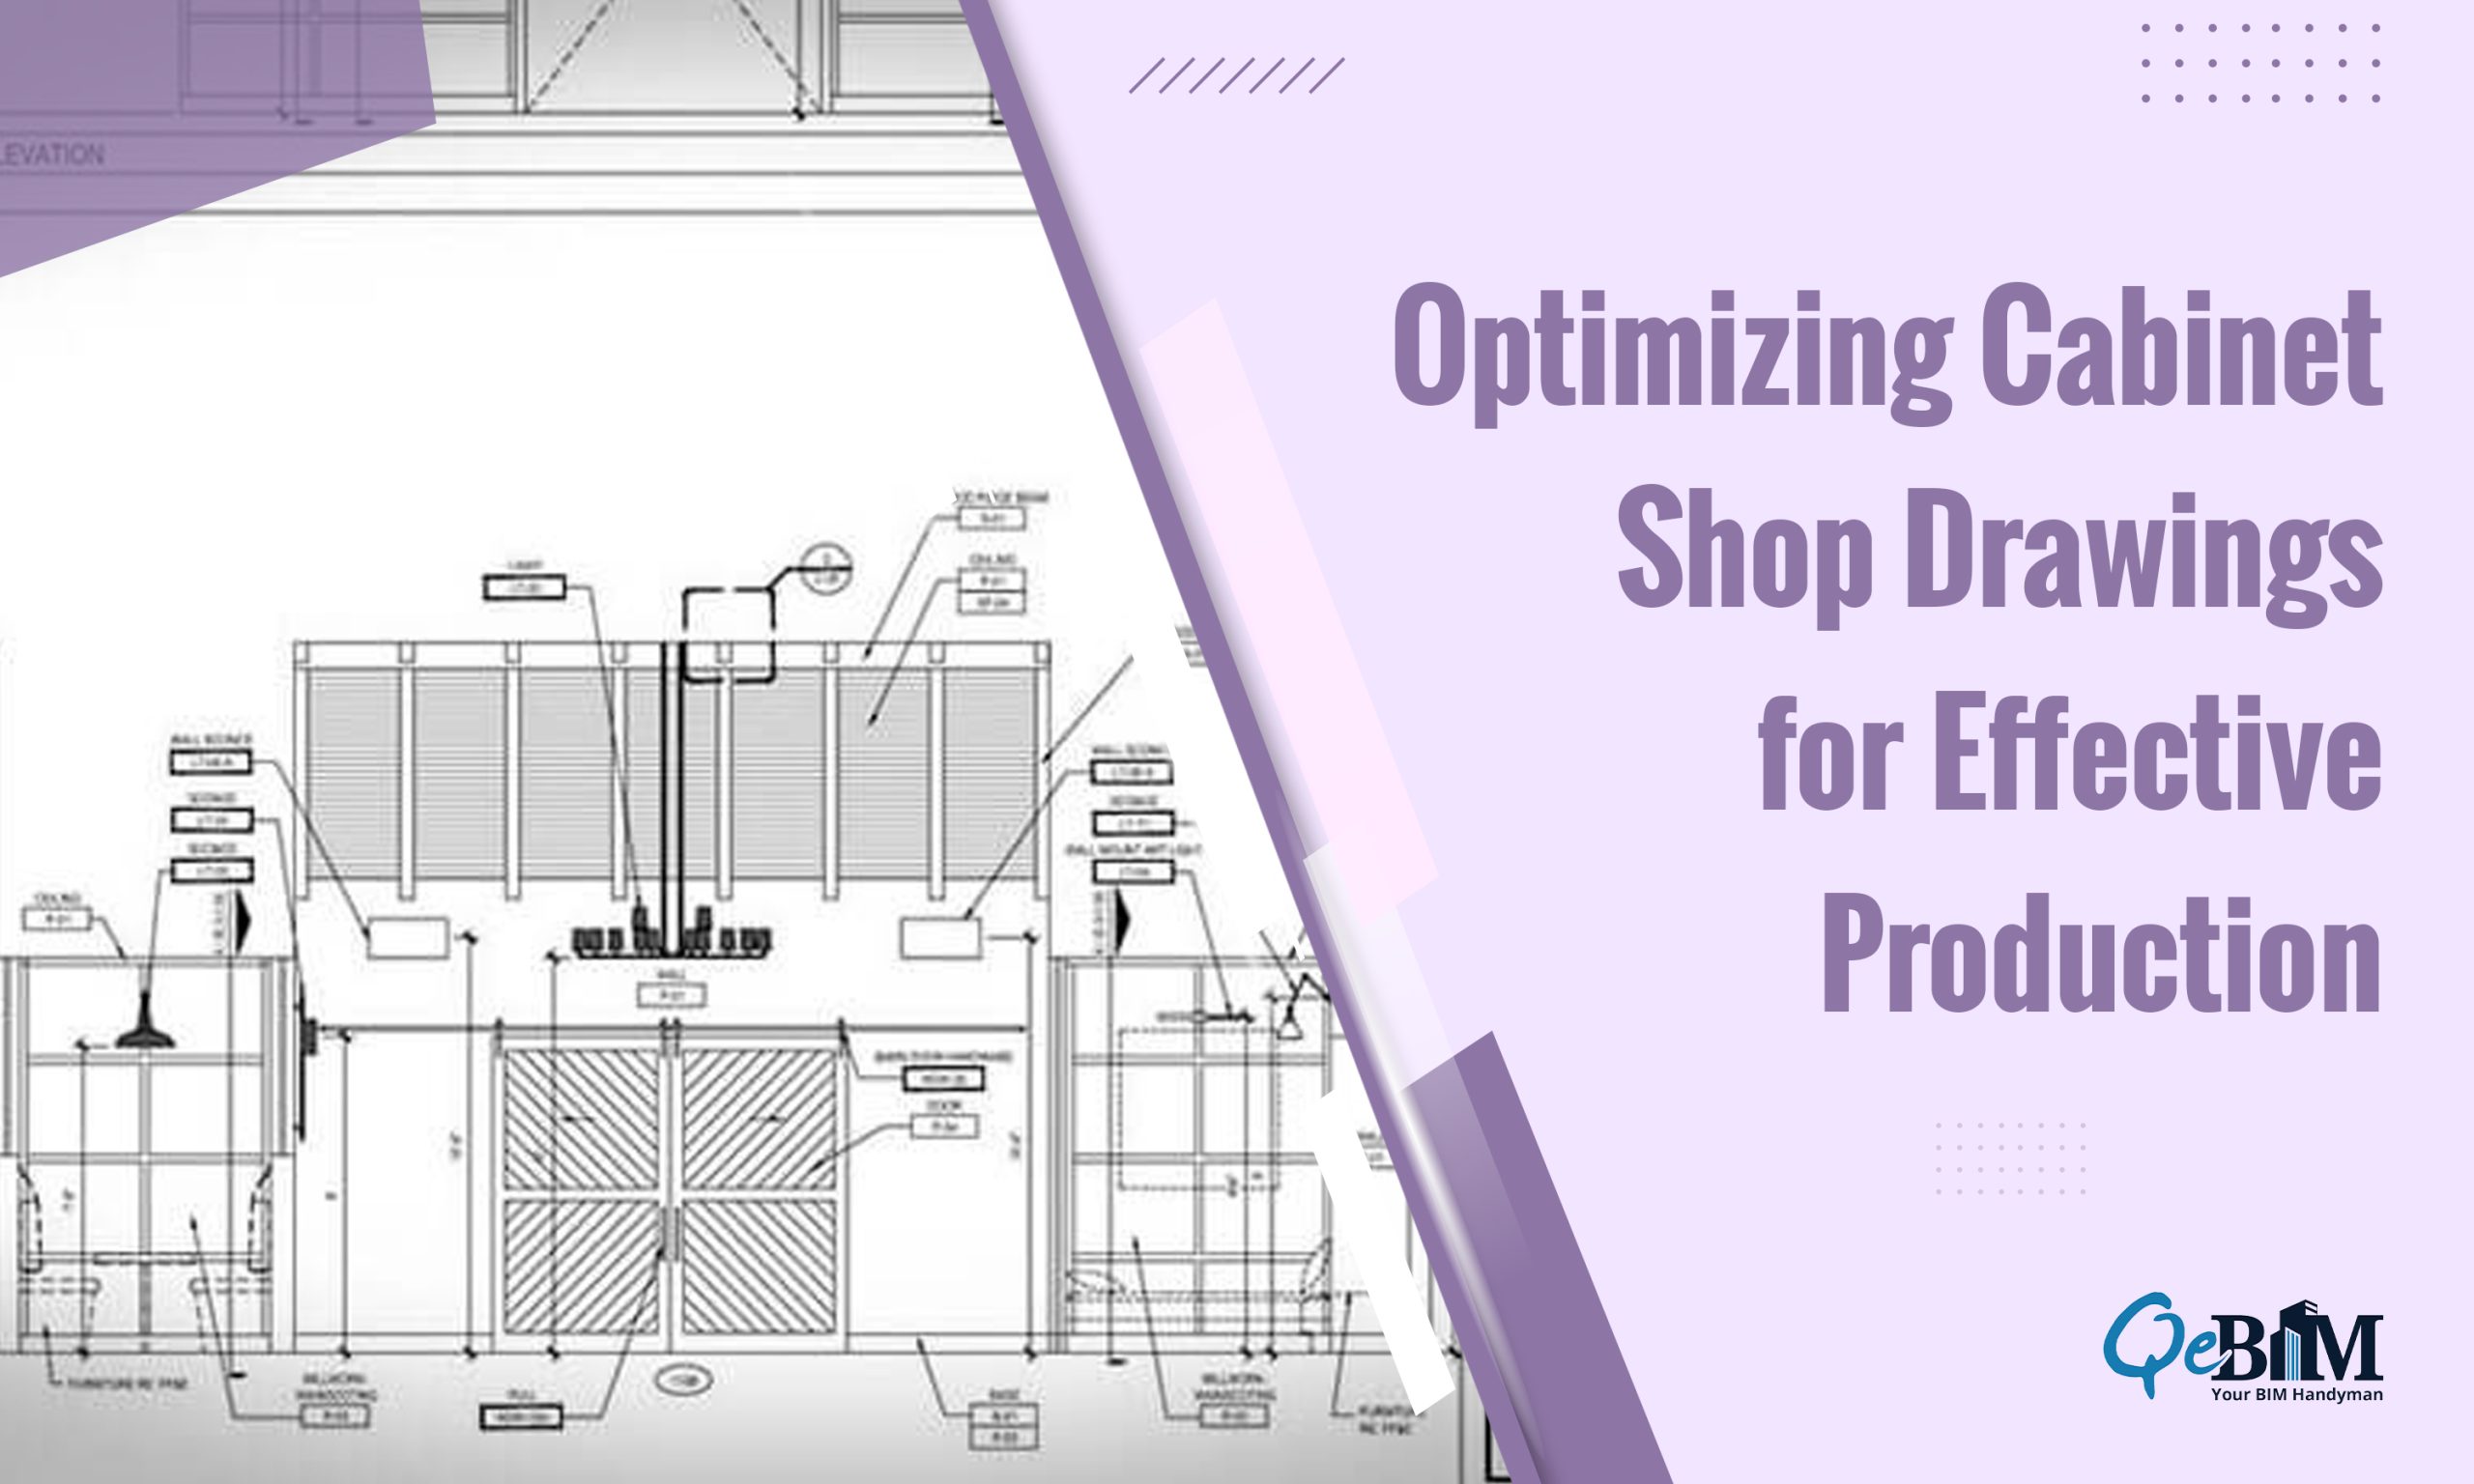 Optimizing Cabinet Shop Drawings for Effective Production